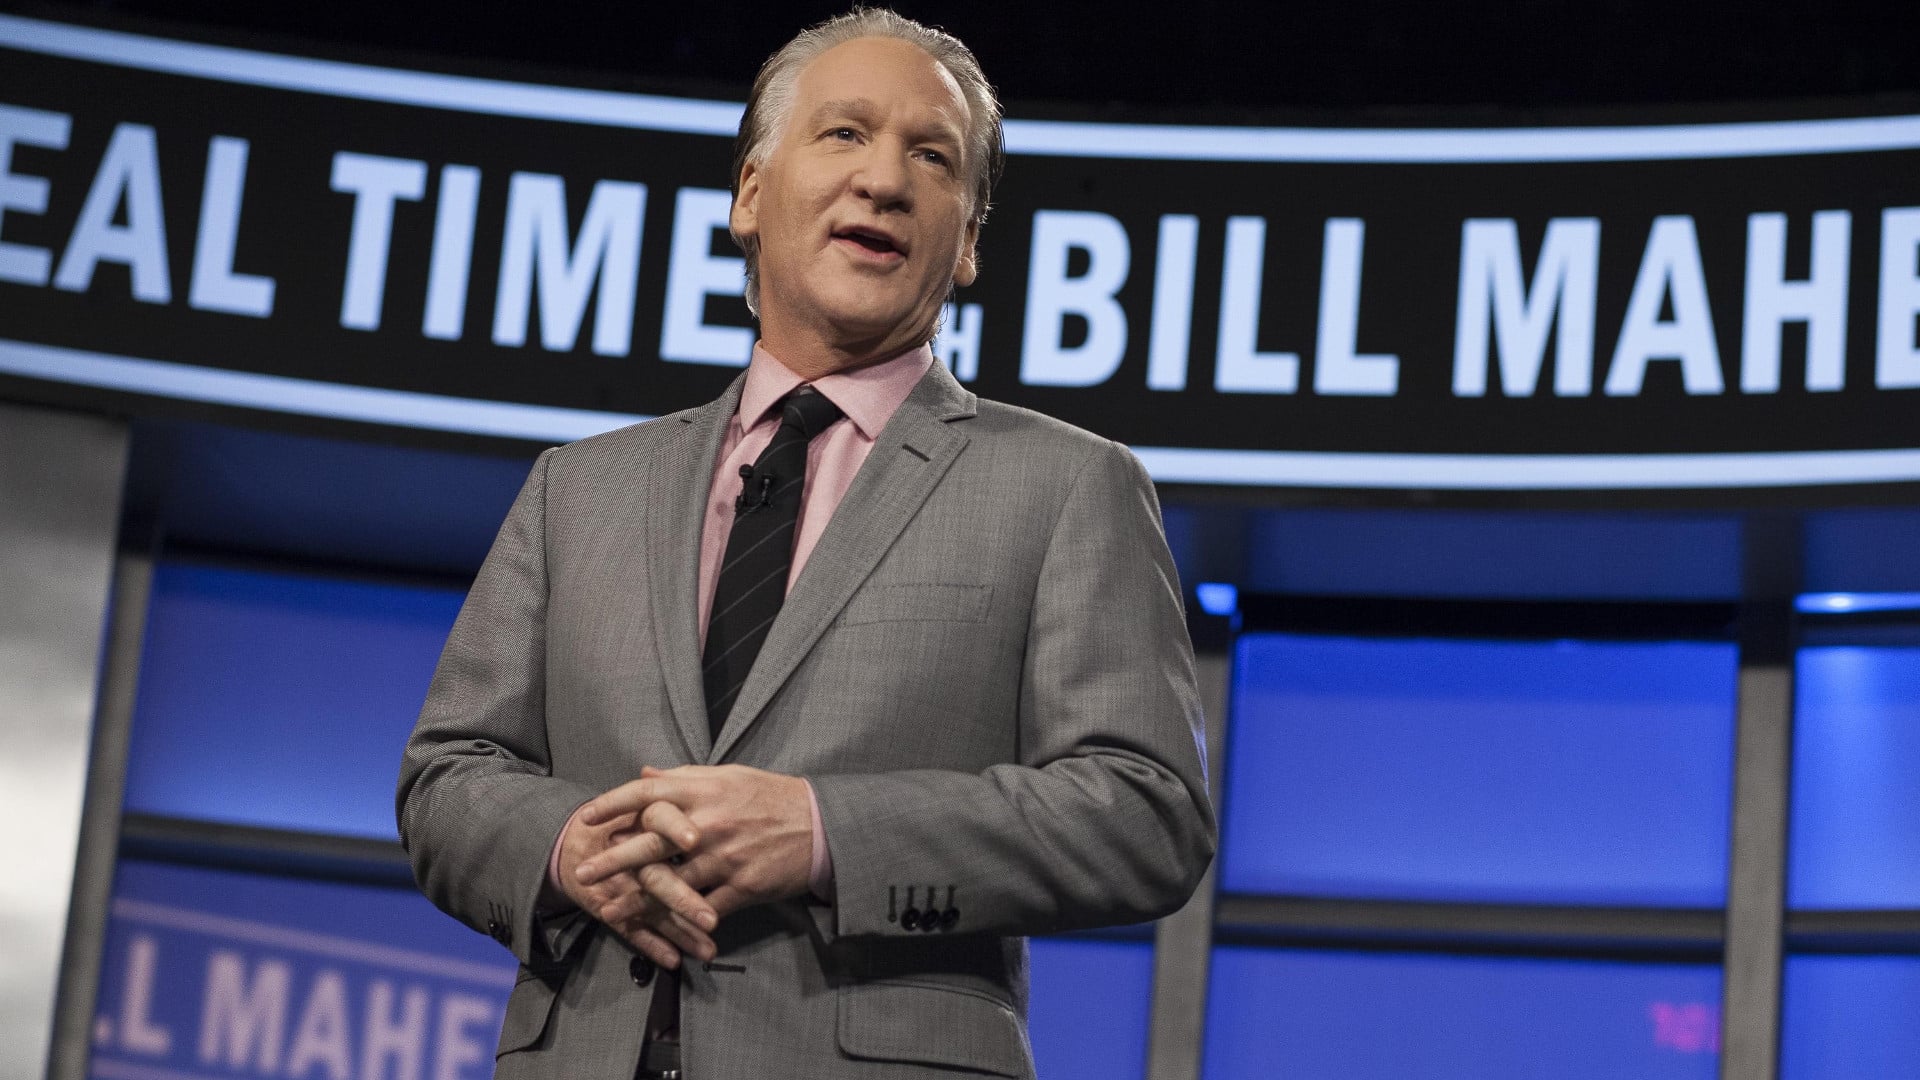 Real Time with Bill Maher - Season 18